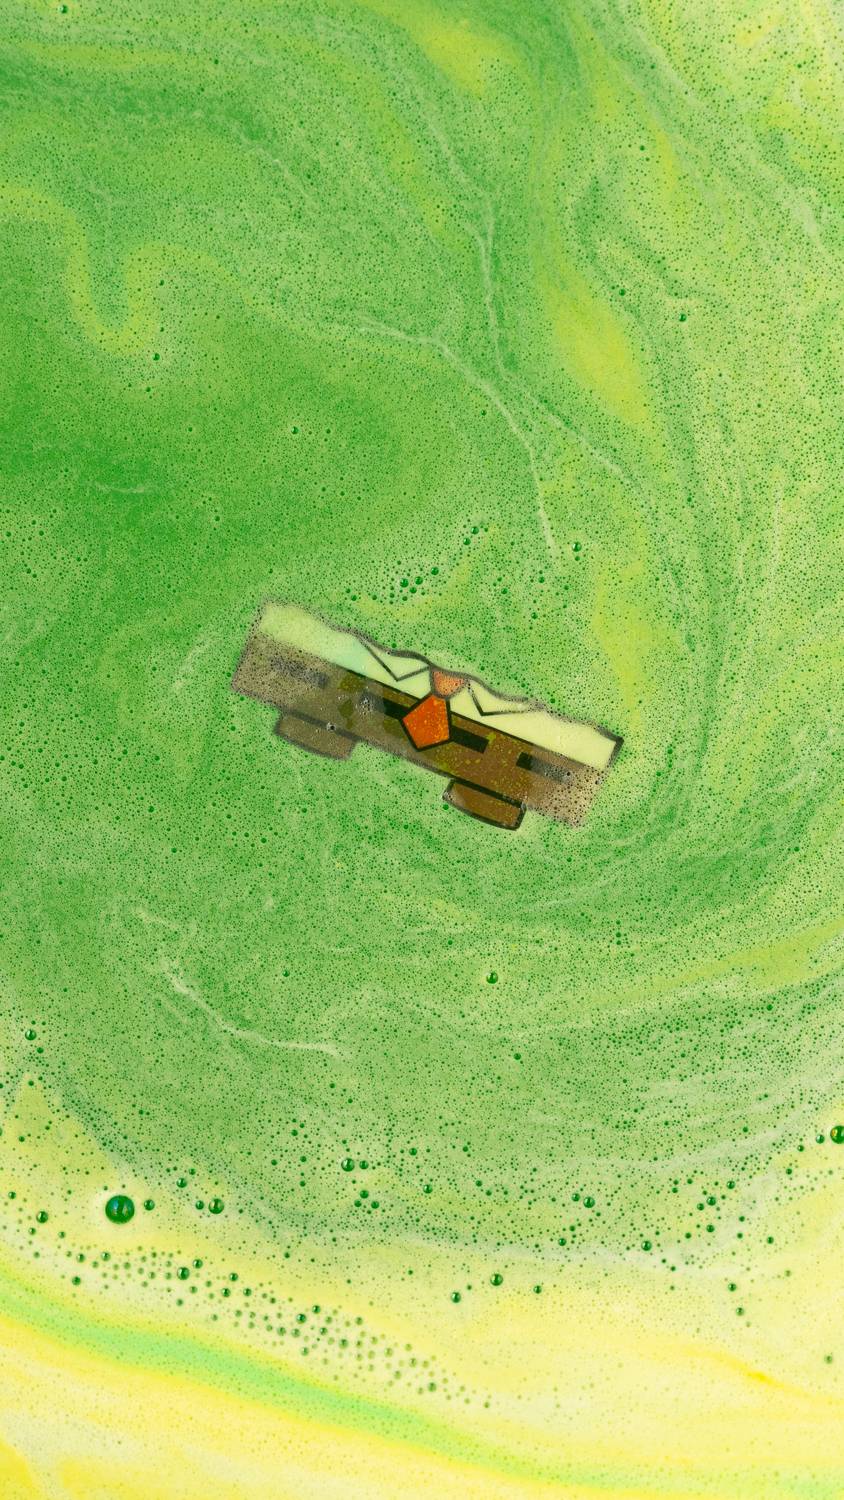 A close-up of Spongebob’s staple shirt and shorts printed on rice paper among a sea of green foam.